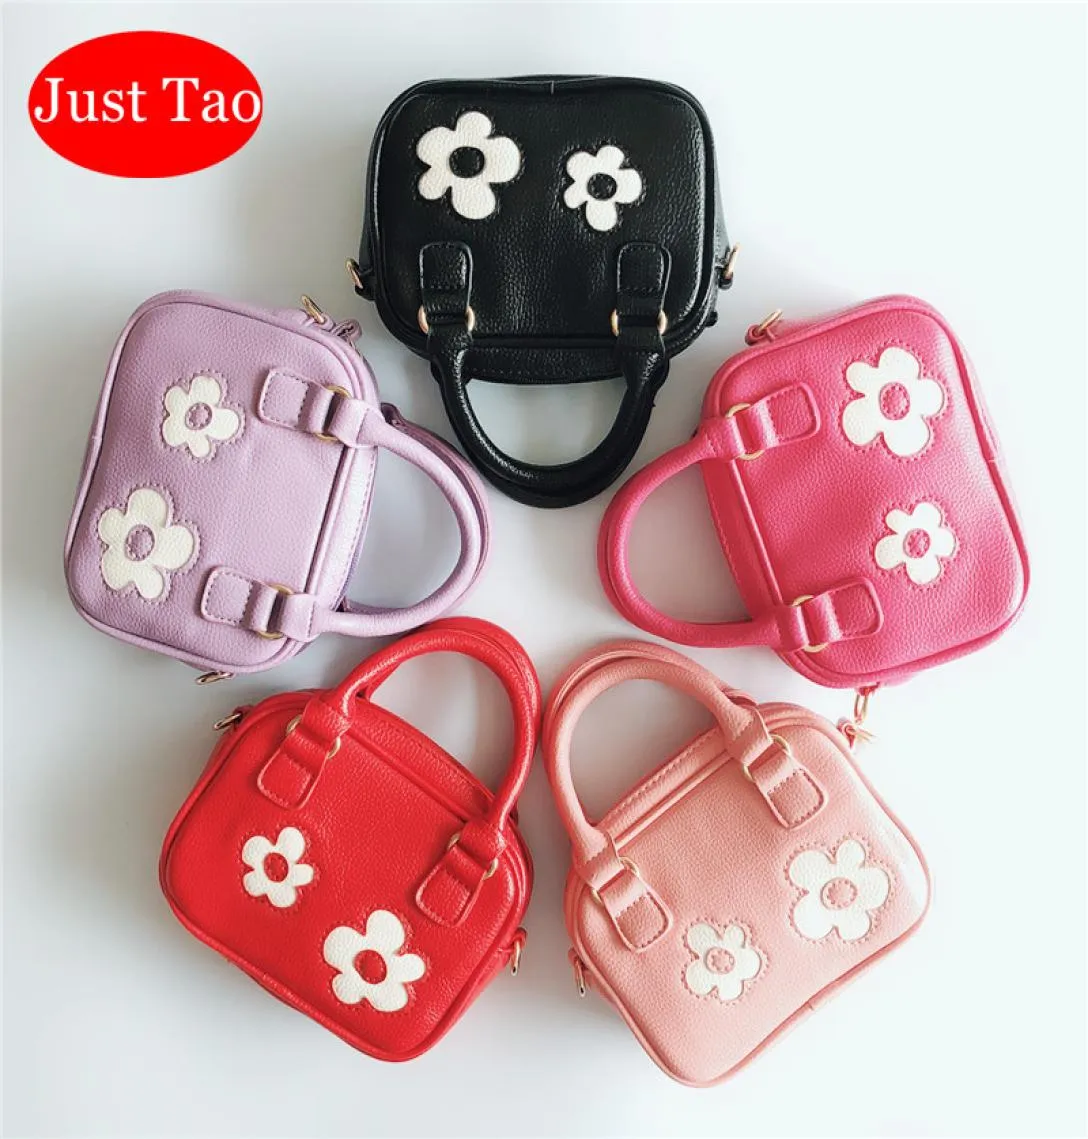 Just Tao Kids cute Flower Bag handbags baby girls small totes Toddlers pu leather fashion brand tote Teenagers Phone bags JT0188671587